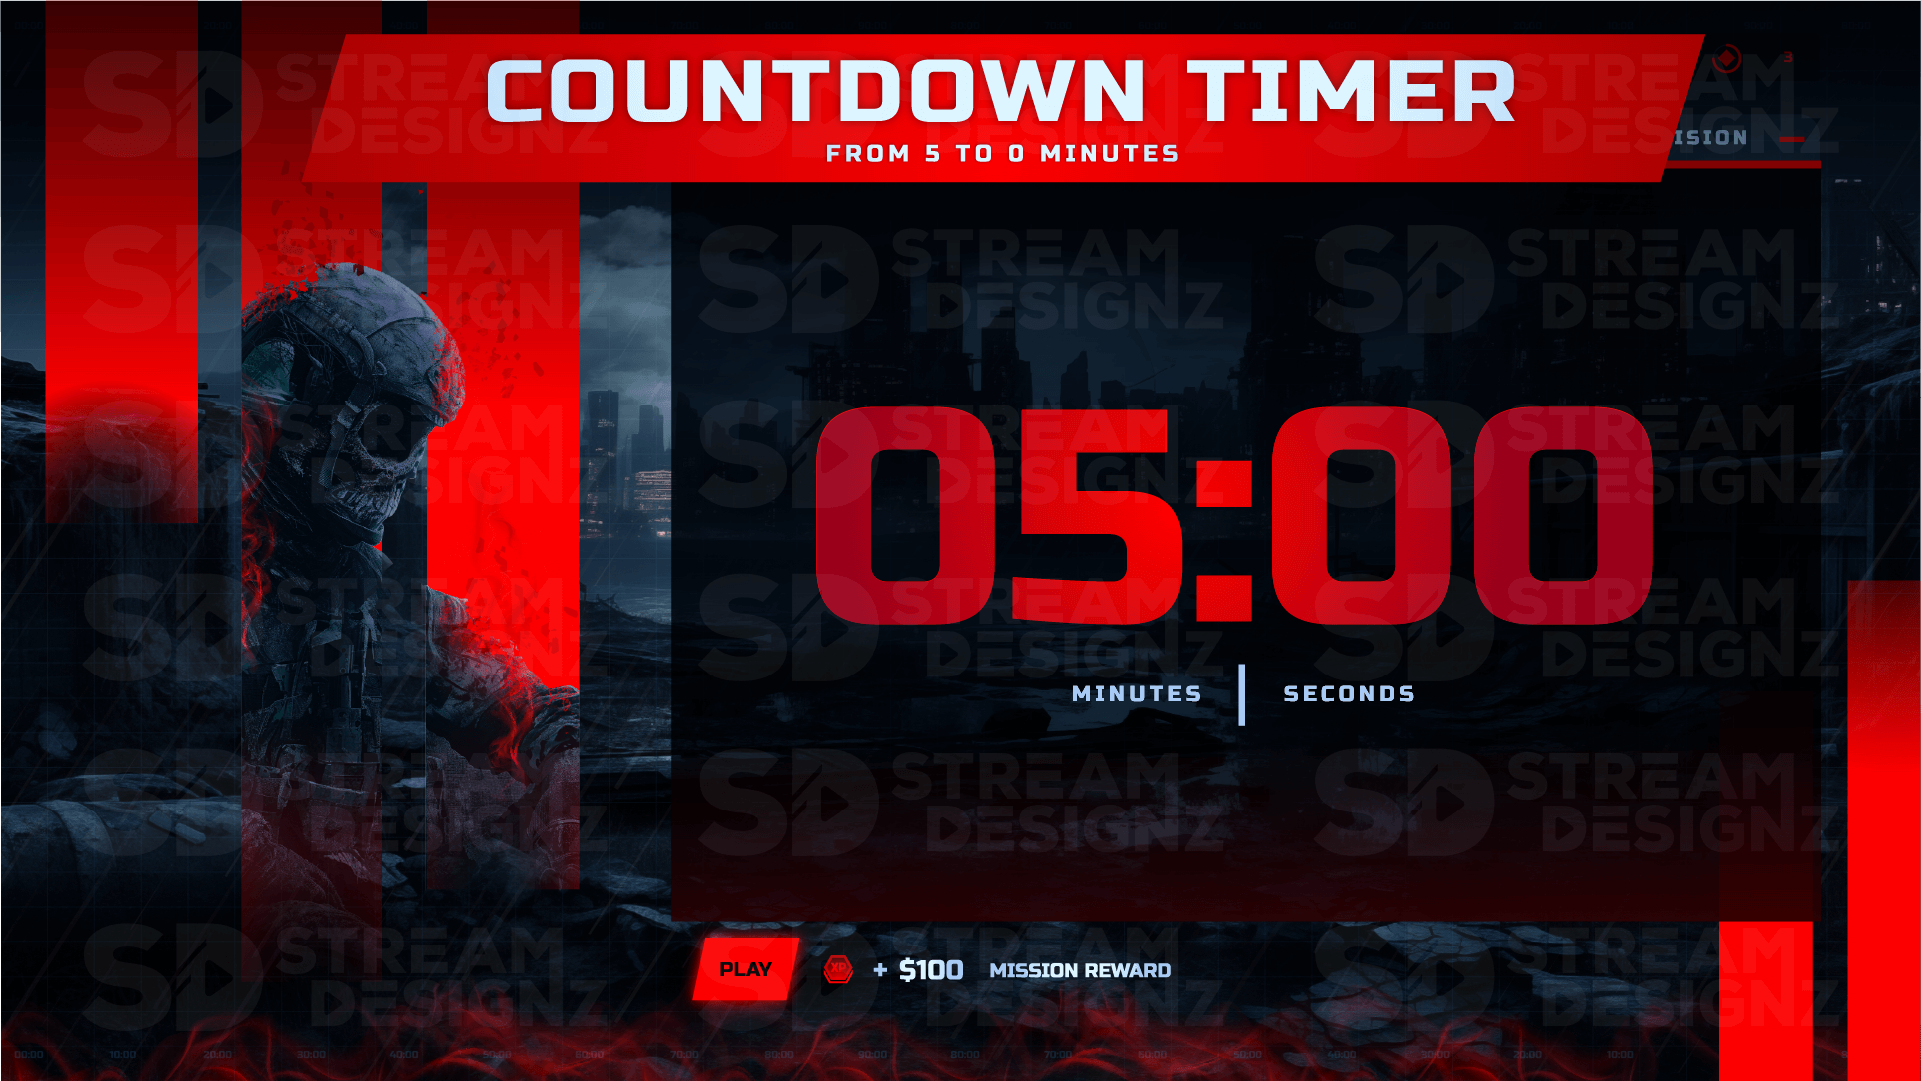 Ultimate stream package 5 minute countdown timer loadout stream designz